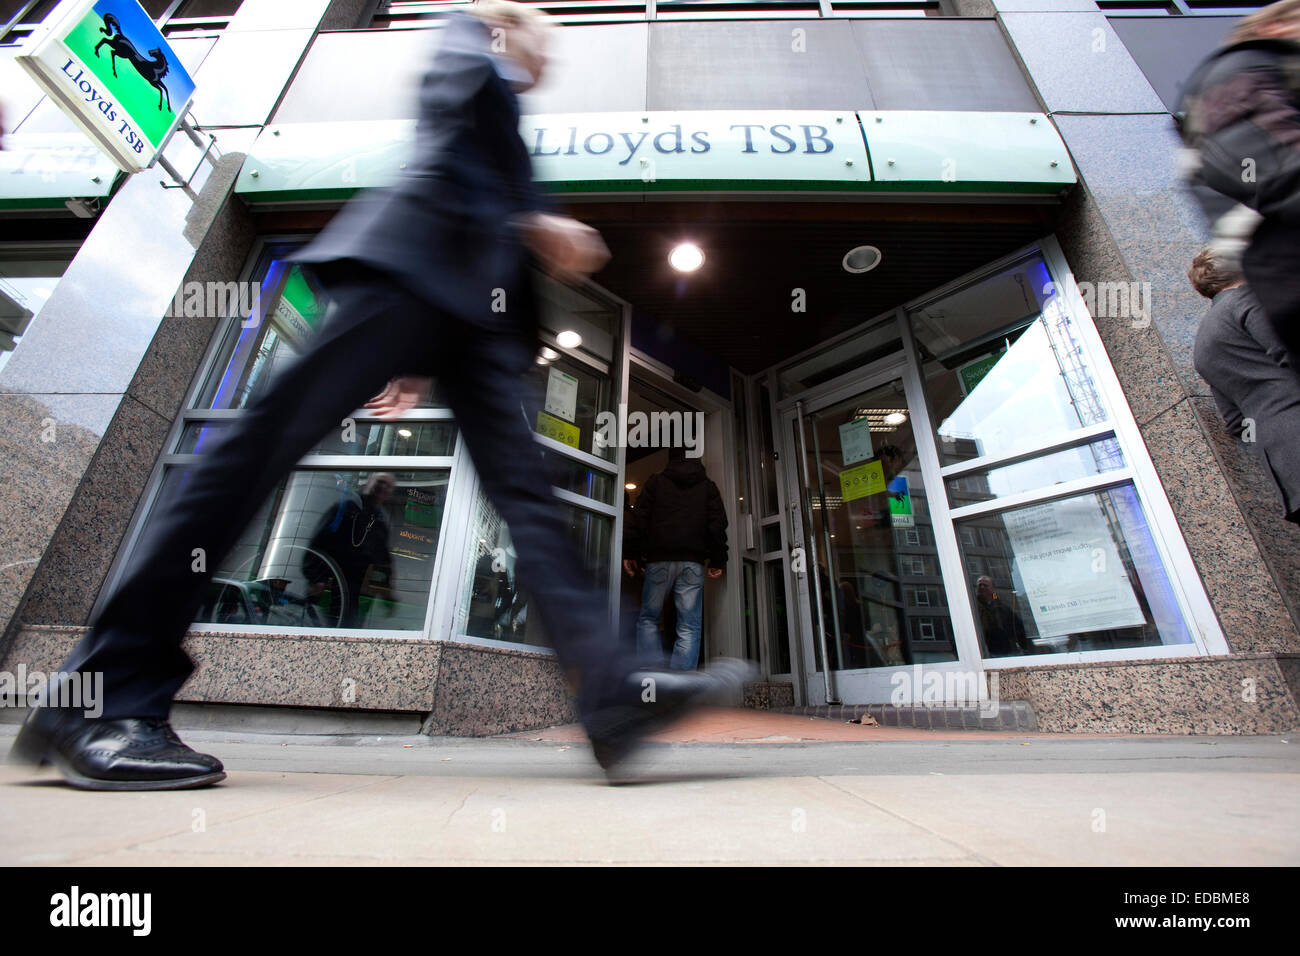 Exterior of a Lloyds TSB branch. Stock Photo